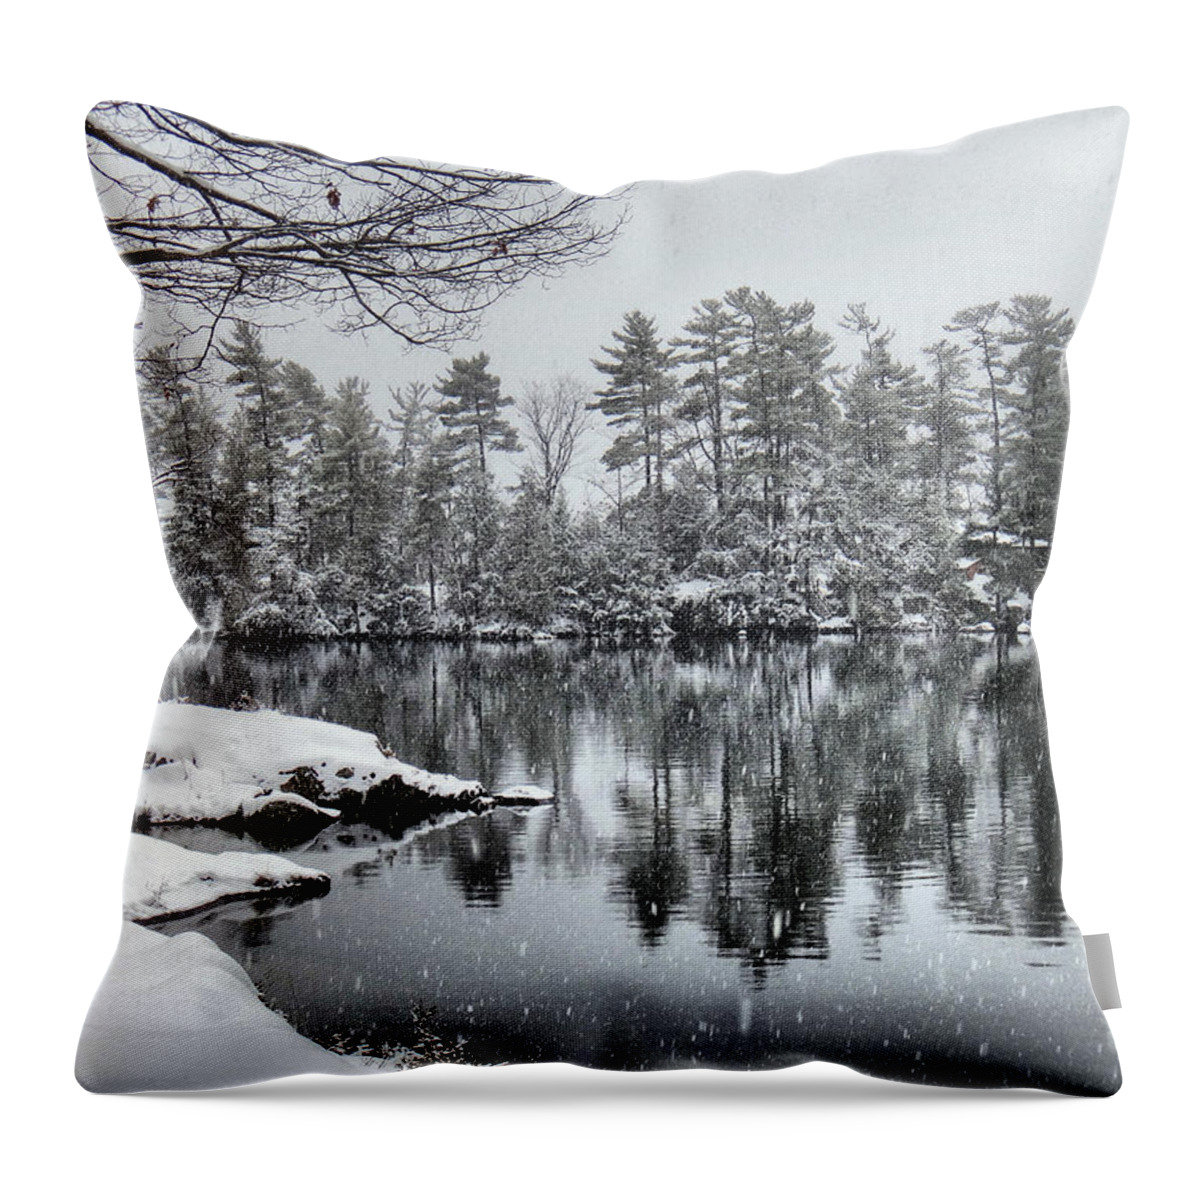 Trees Throw Pillow featuring the photograph Tea Island Winter Reflections by Russel Considine